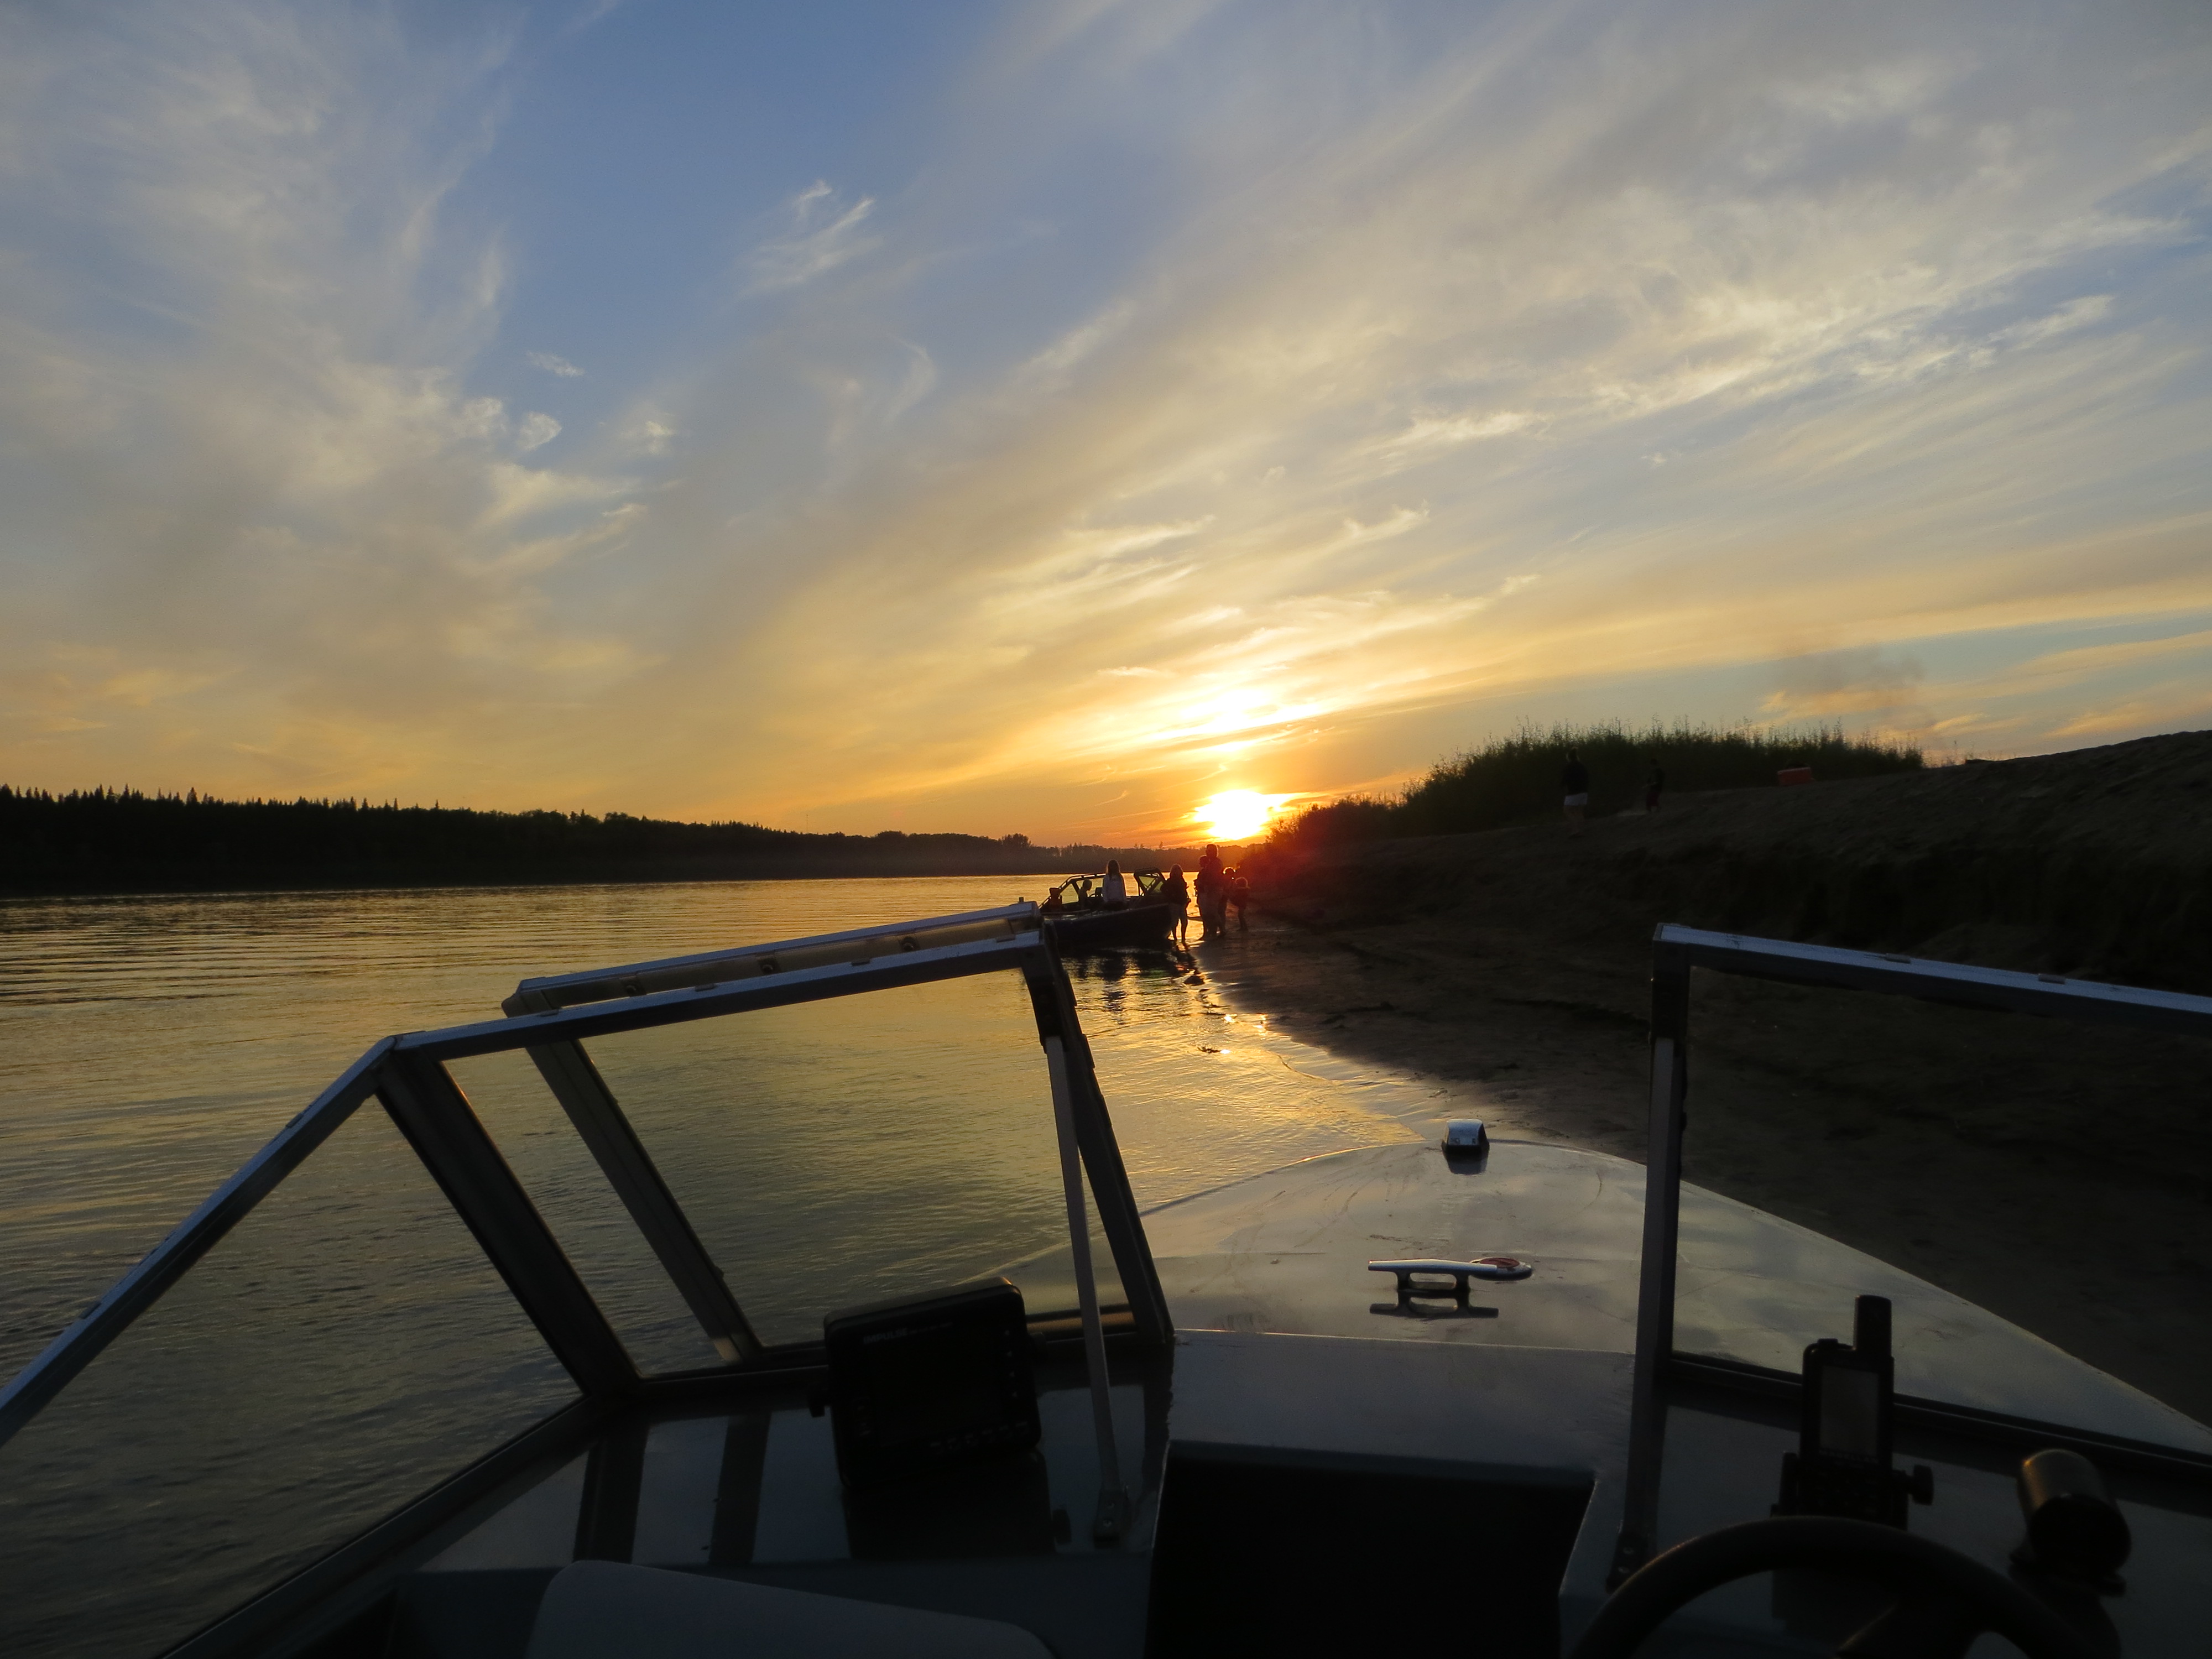 Sunset on the Peace River. Photo Credit Marilee Cranna Toews